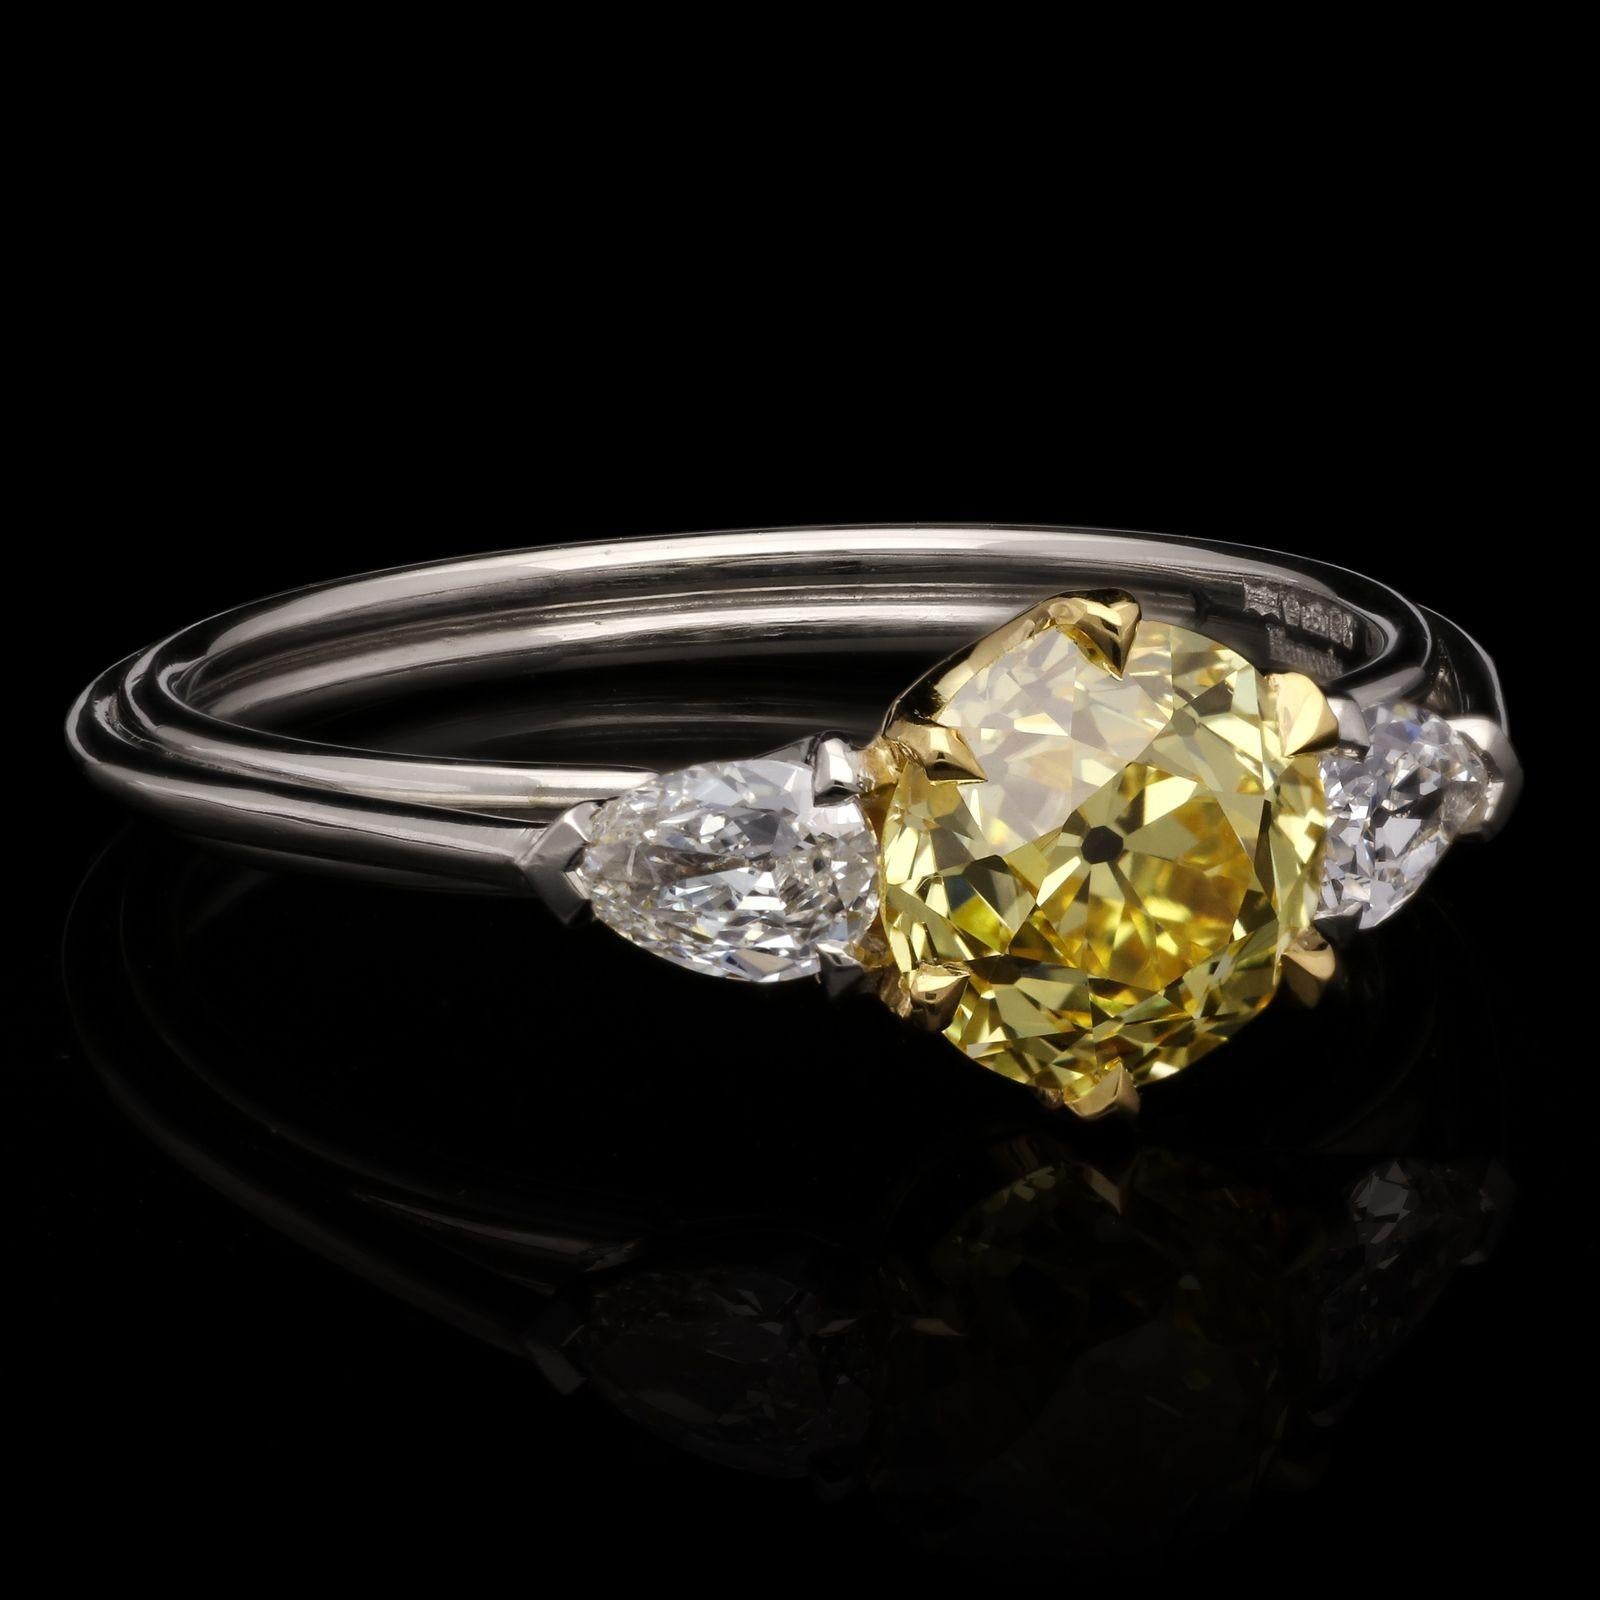 A beautiful old cut fancy diamond and white diamond ring by Hancocks, centred with a wonderful old European brilliant cut diamond weighing 1.27cts and of Fancy Intense Yellow colour and VVS2 clarity, claw set in 18ct yellow gold with open scooped